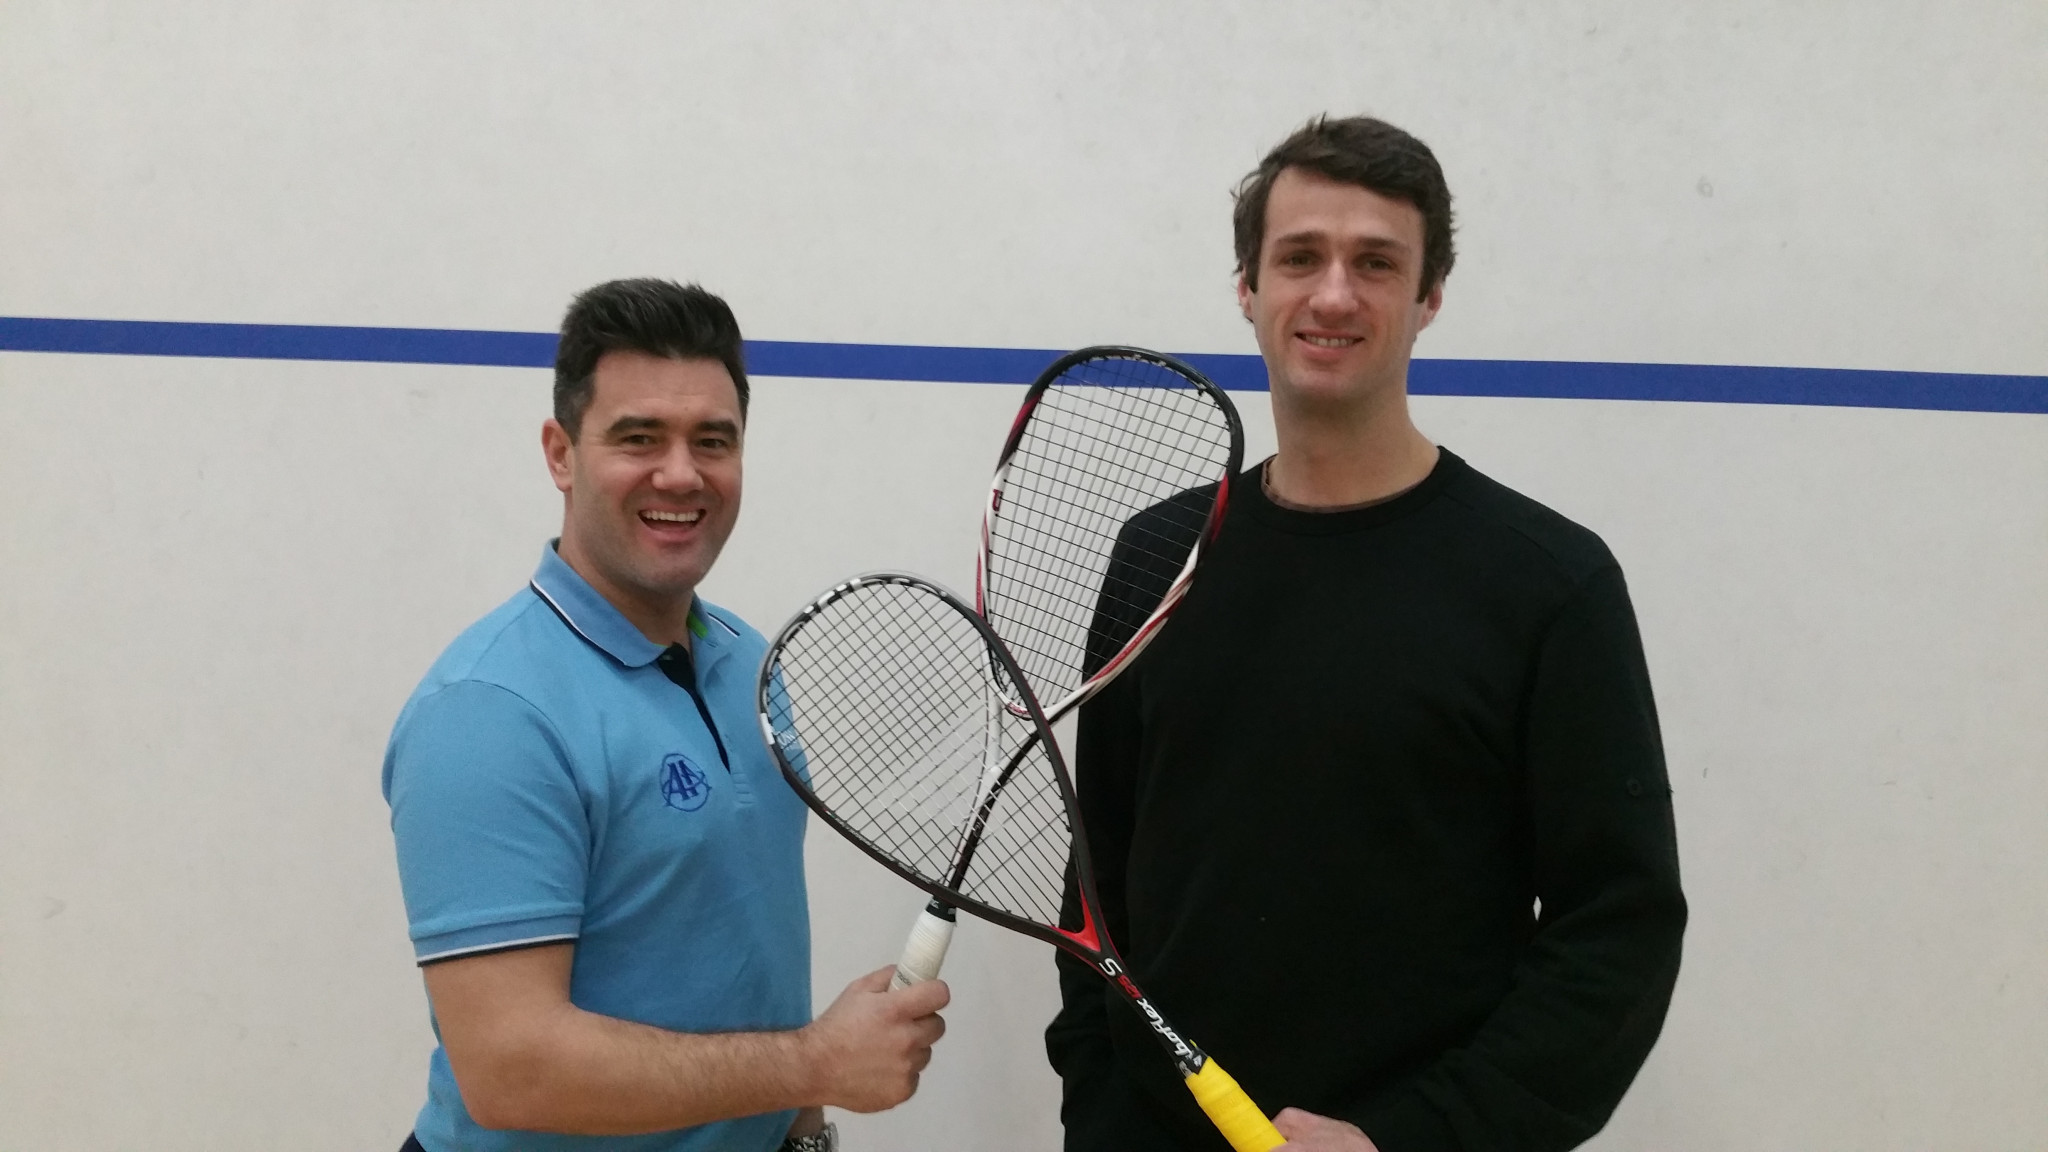 Ryan Briggs, left, and Lazare Morel, right, play in the same squash club in Kent ©PSA